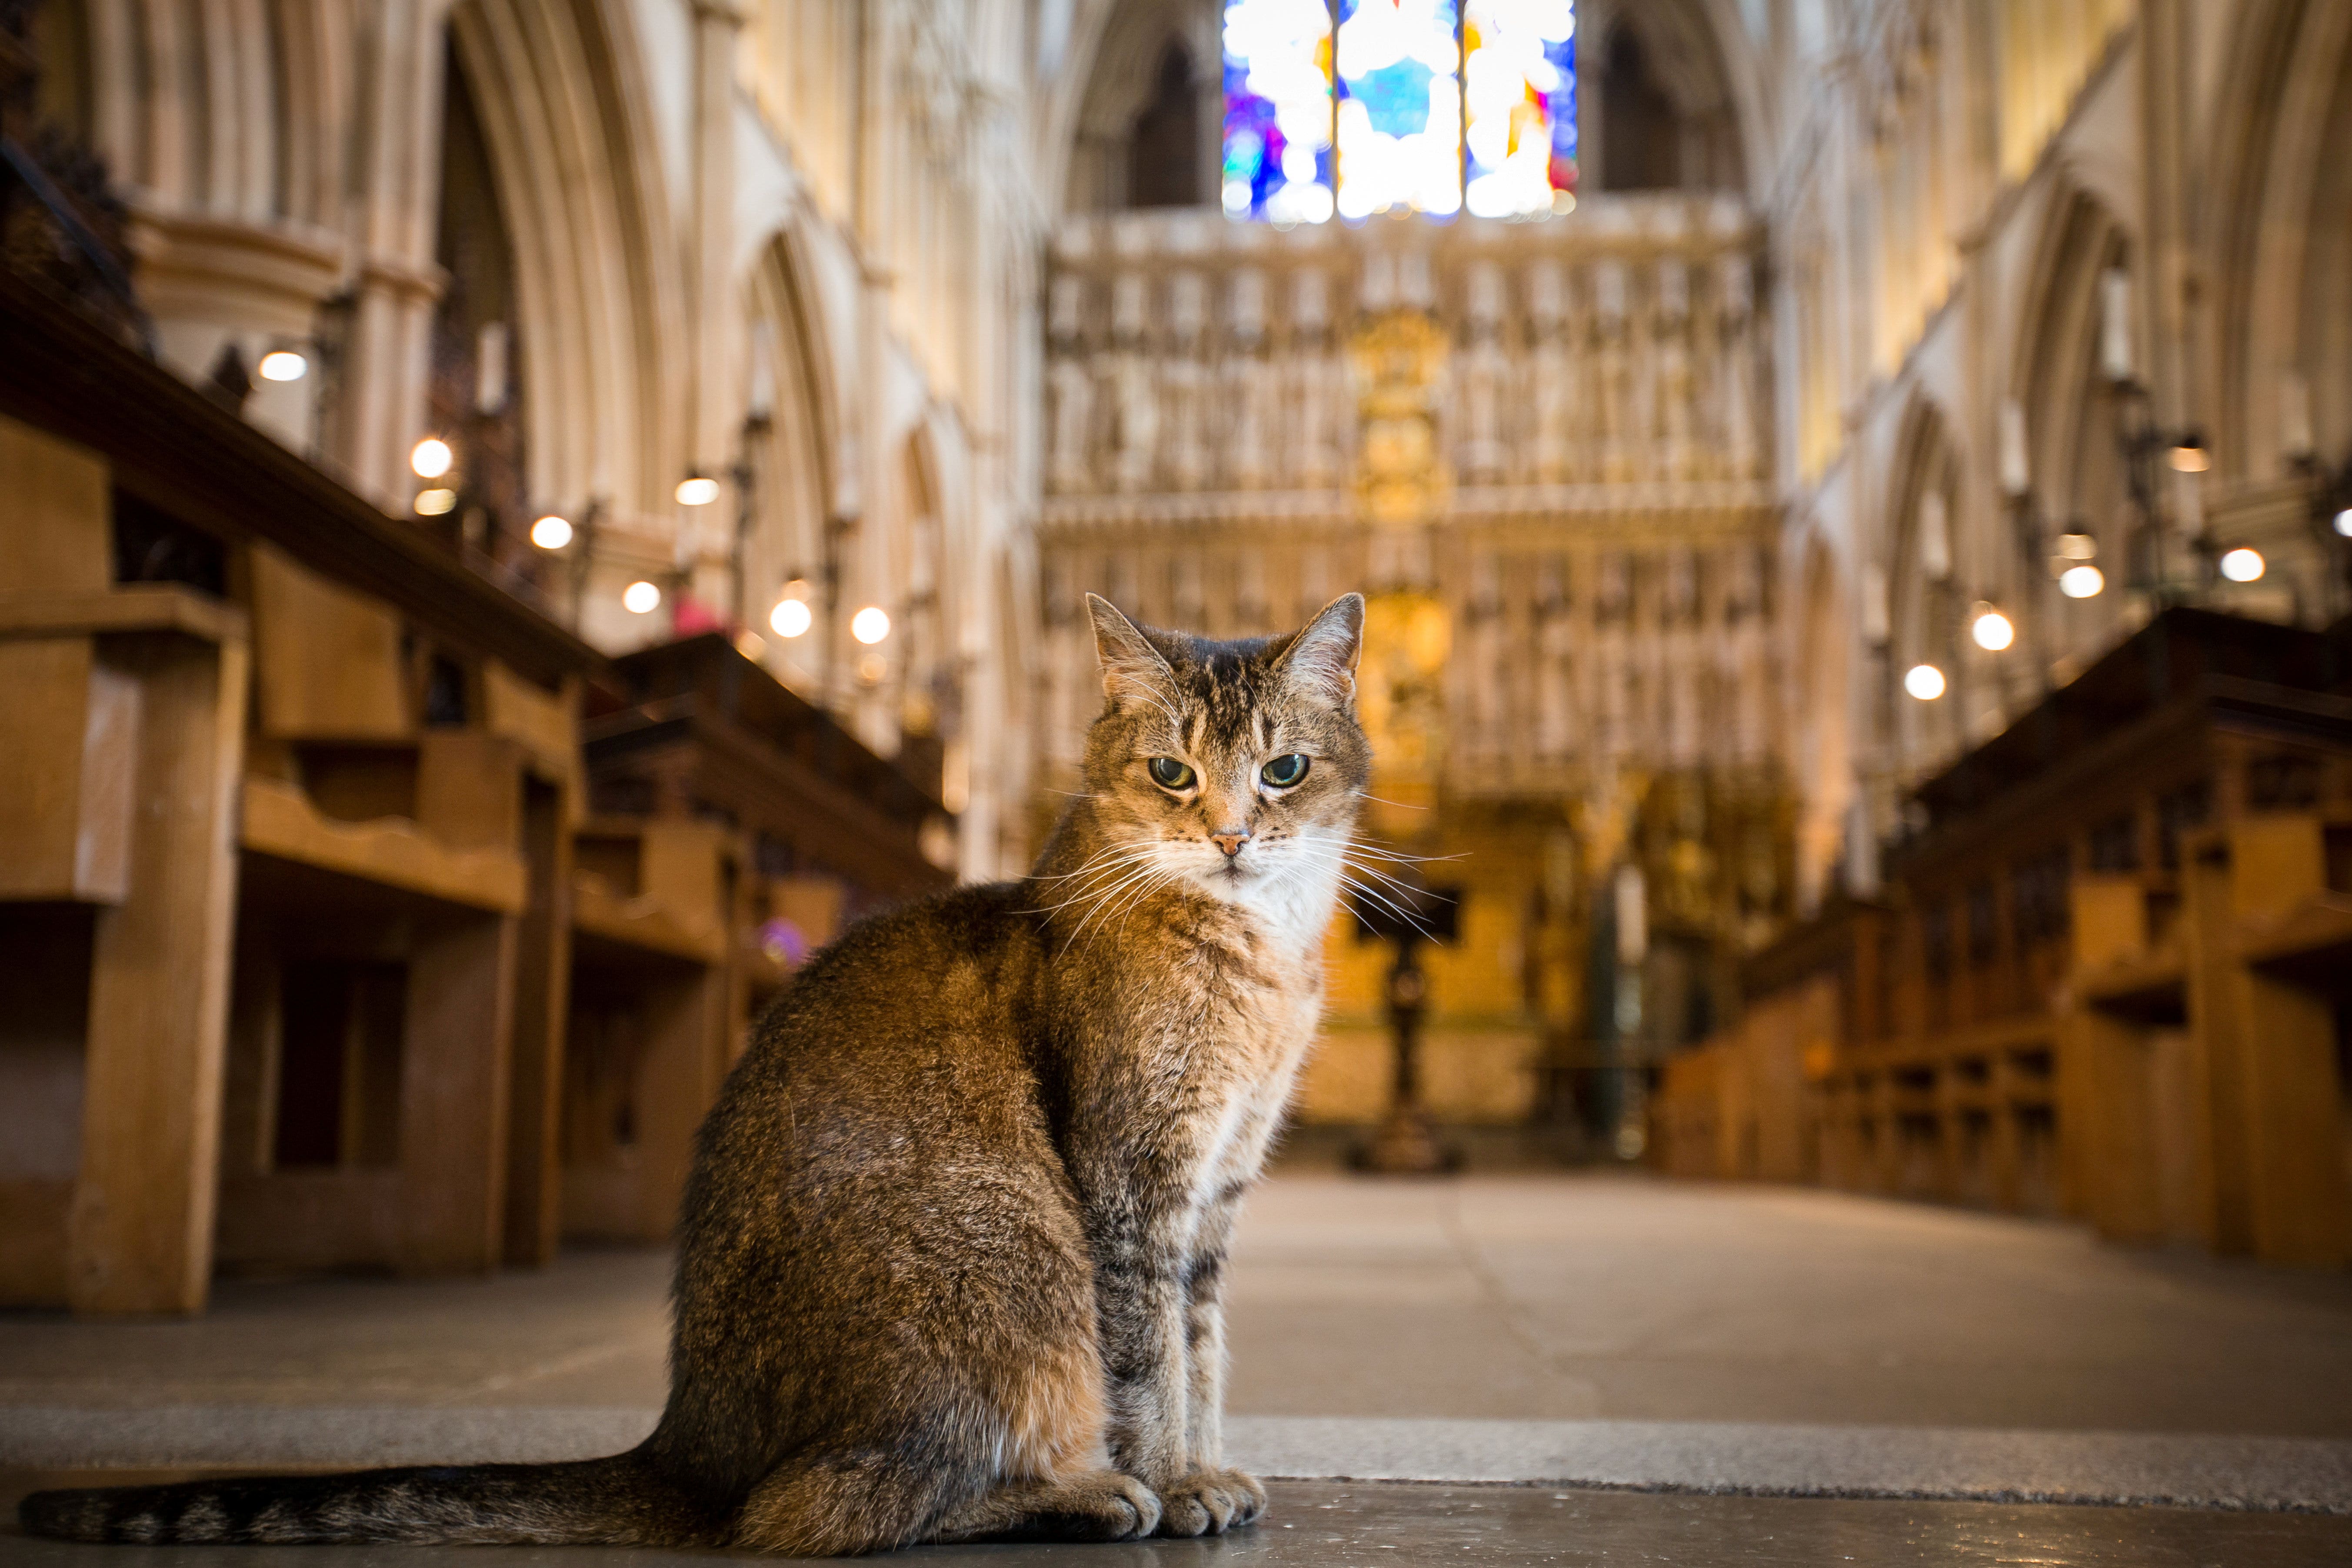 FOX NEWS: London cathedral honors beloved stray cat with memorial service